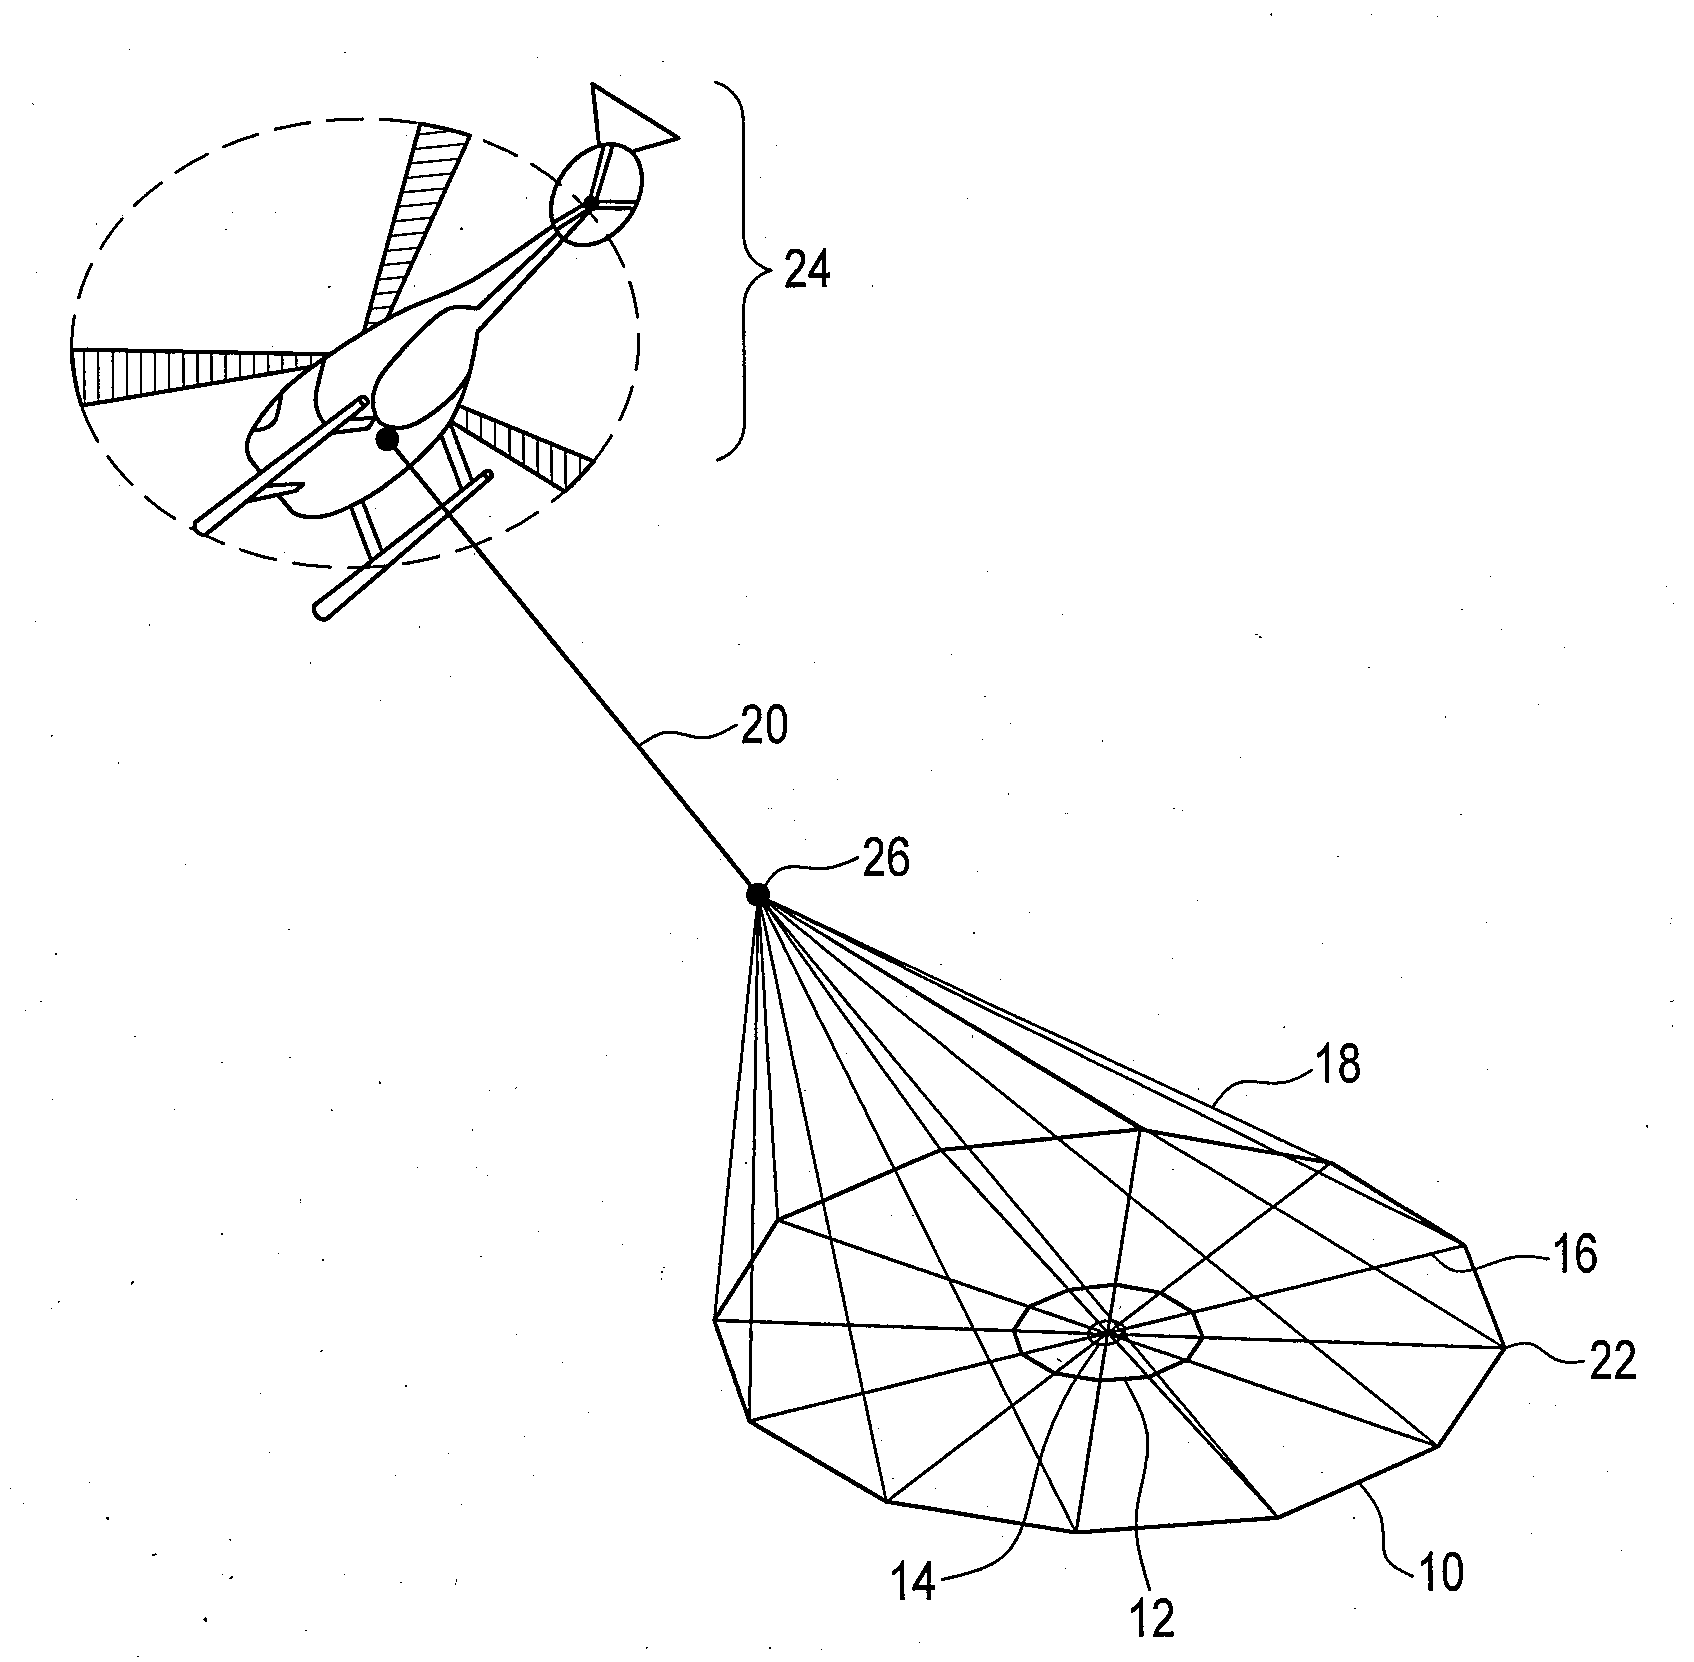 Bucking coil and b-field measurement system and apparatus for time domain electromagnetic measurements